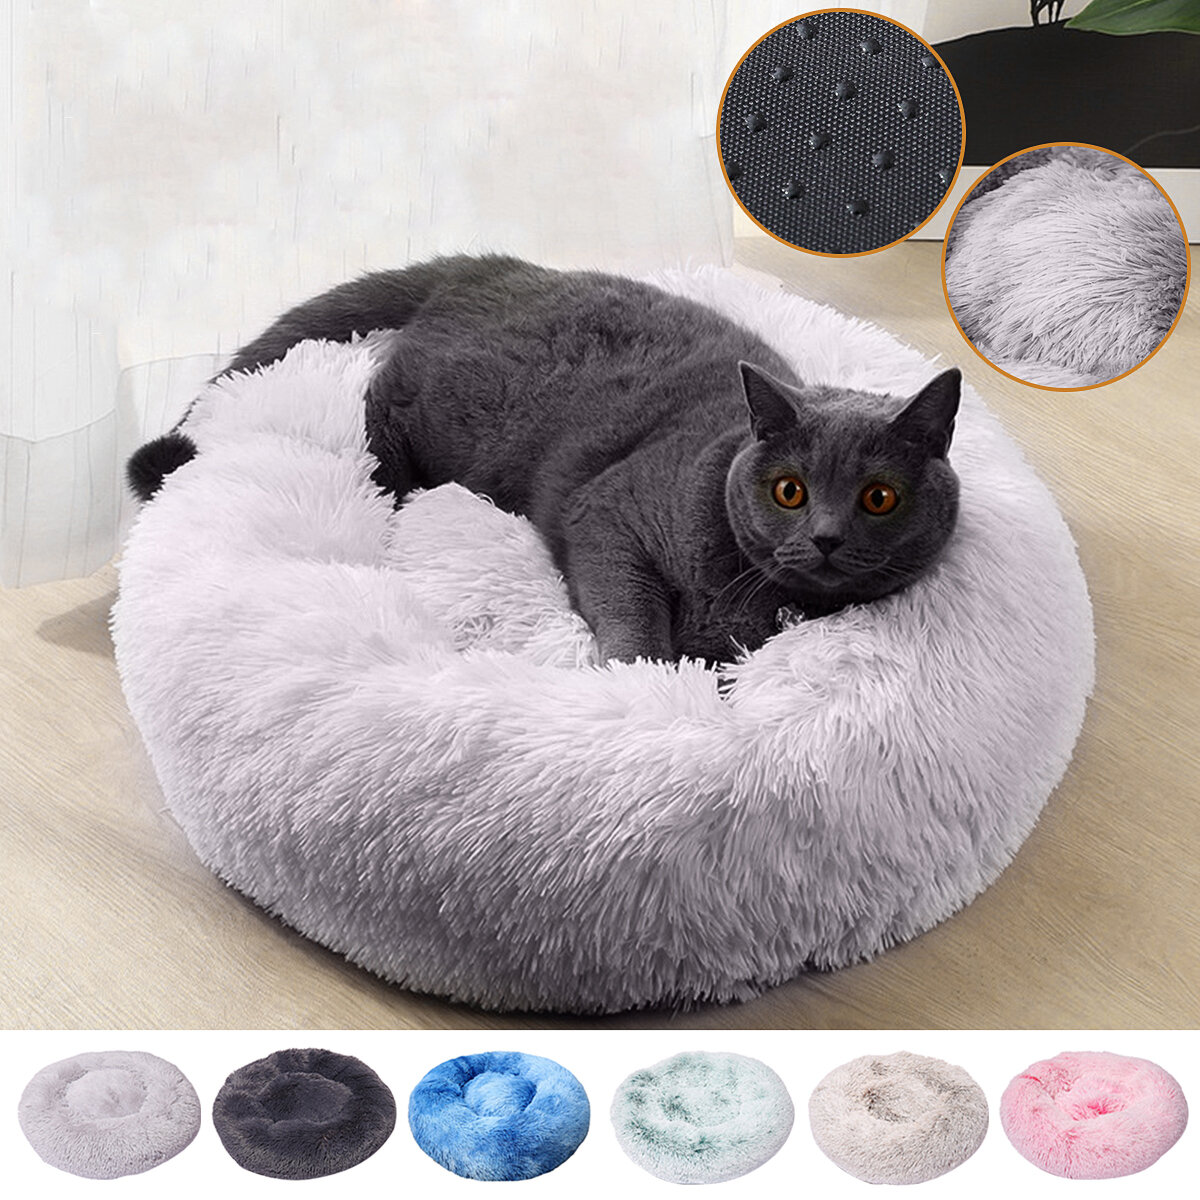 60cm Plush Fluffy Soft Pet Bed for Cats & Dogs Calming Bed Pad Soft Mat Home